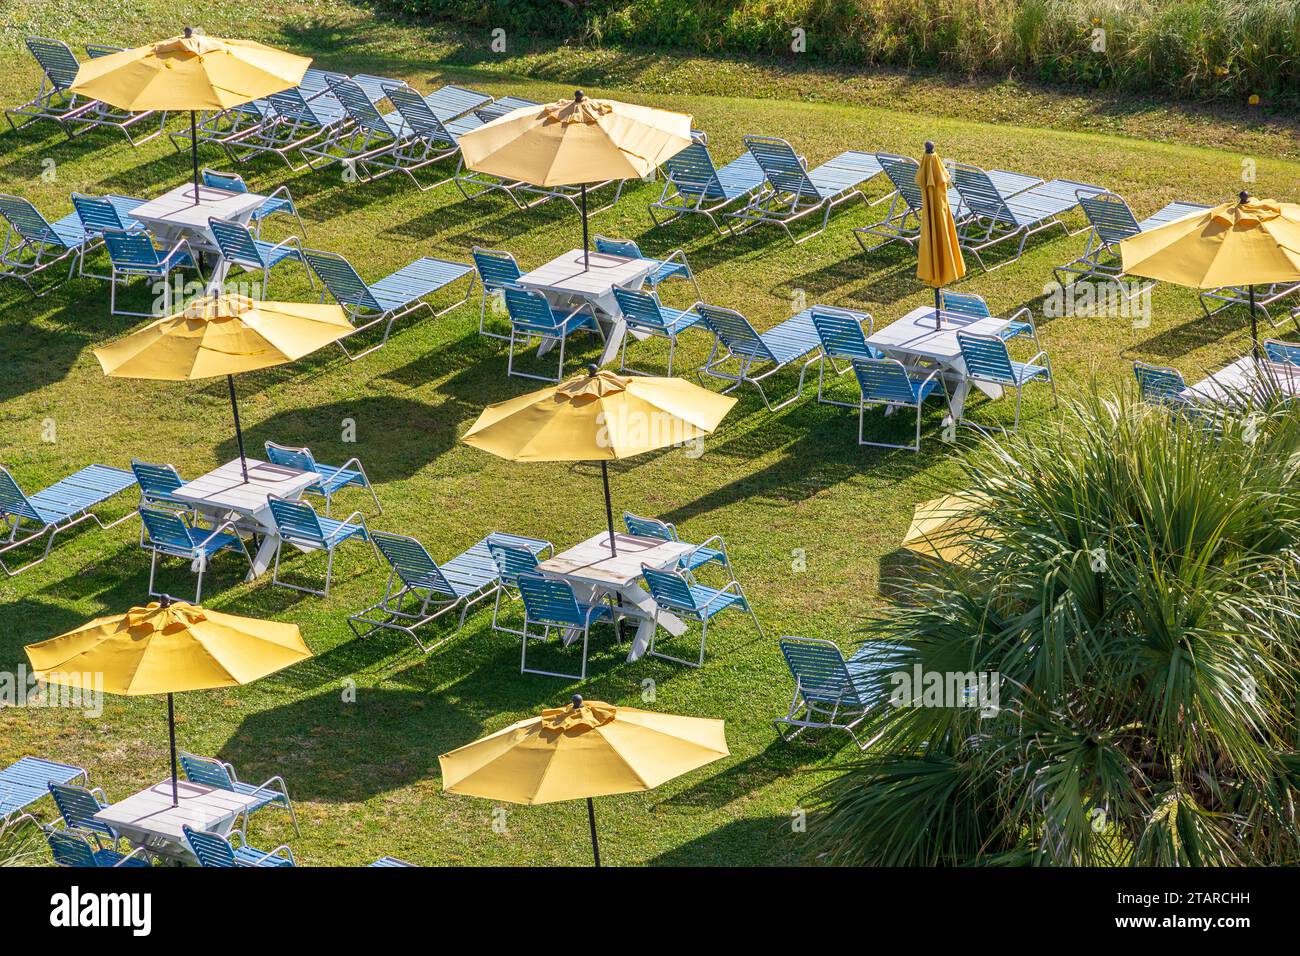 Yellow Sun Umbrellas And Blue Sunbeds On A Lawn At An American Coastal Hotel Resort Stock Photo